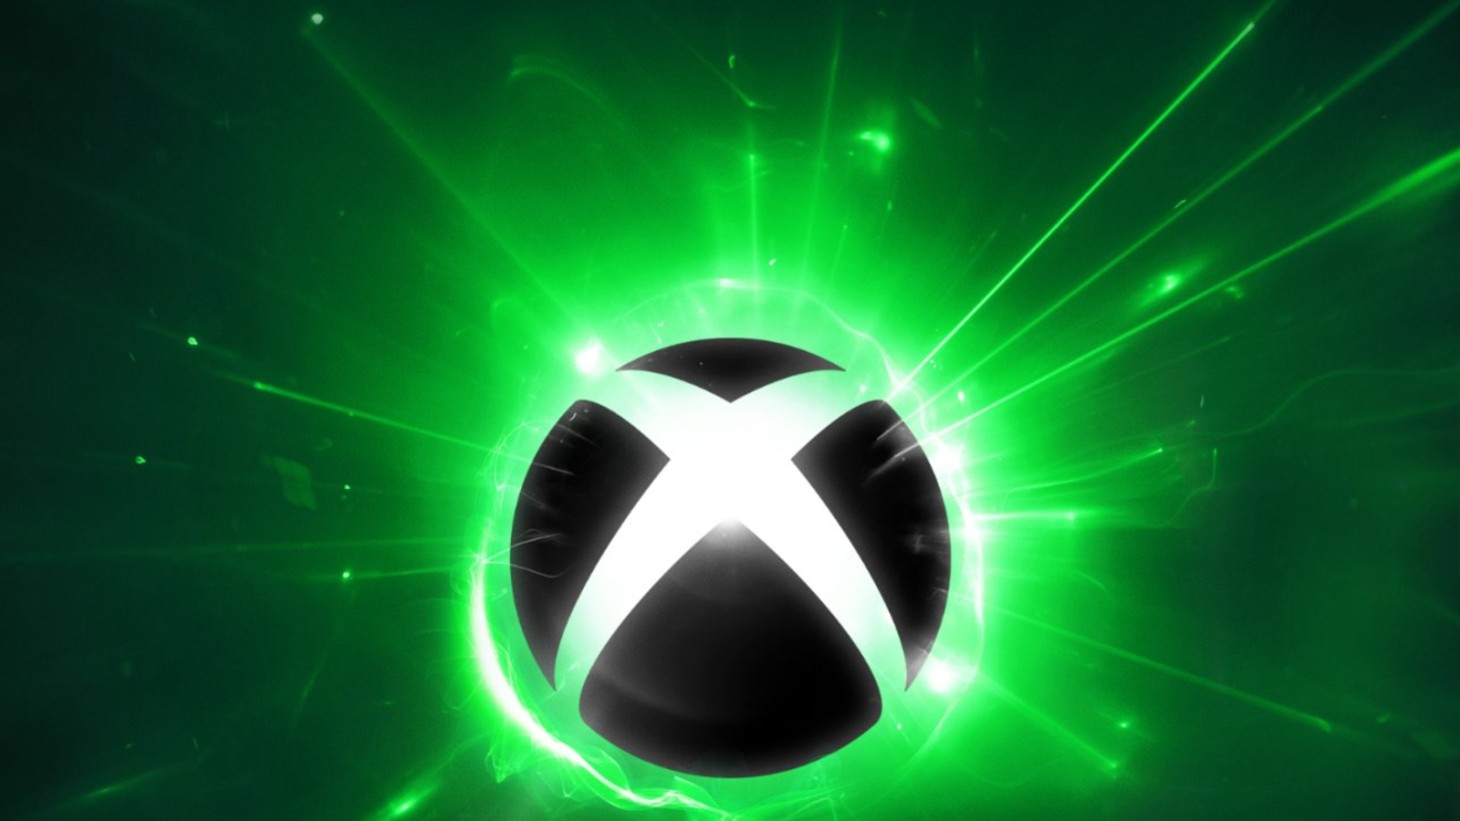 Xbox Games Showcase Announced For June, Followed by A Secret Direct For